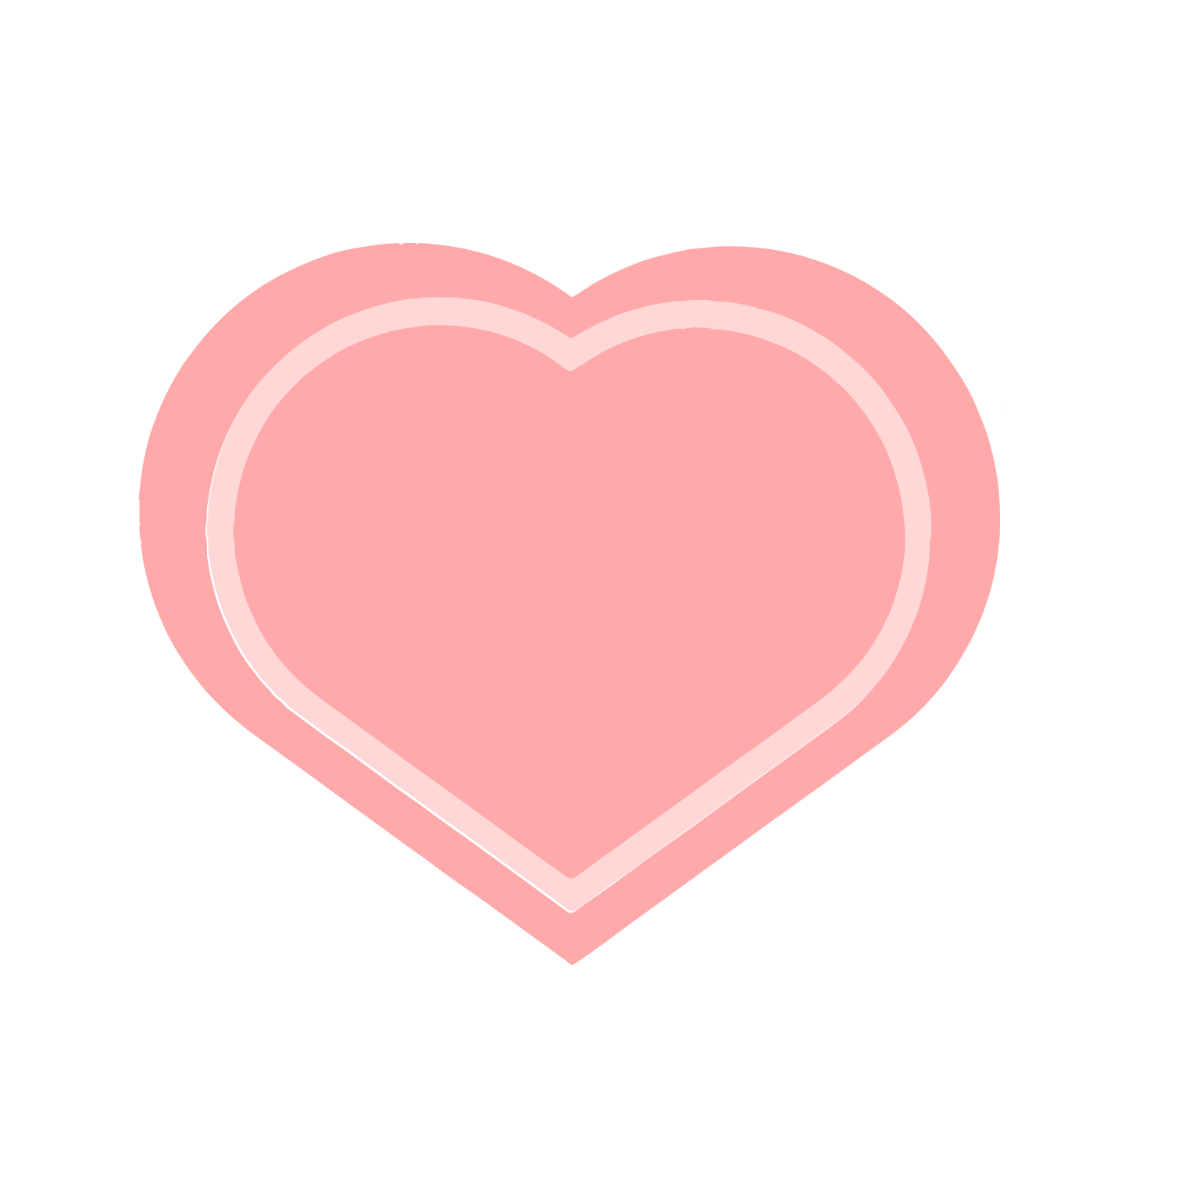 FREE Pink Heart Templates & Examples - Edit Online & Download